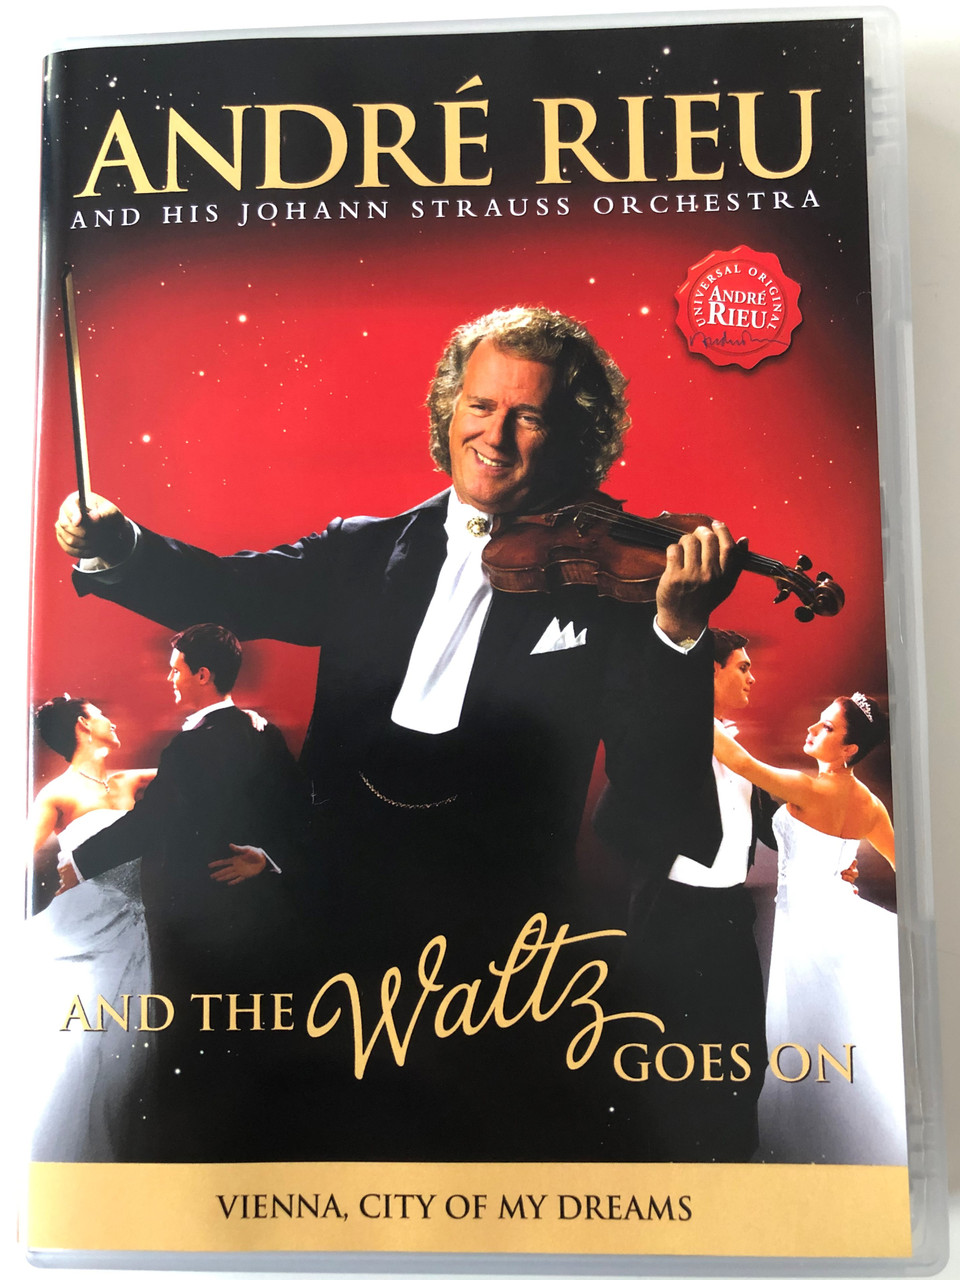 André Rieu and his Johann Strauss Orchestra DVD 2011 And the waltz goes on  / Vienna City of my dreams / Directed by Pit Weyrich - bibleinmylanguage